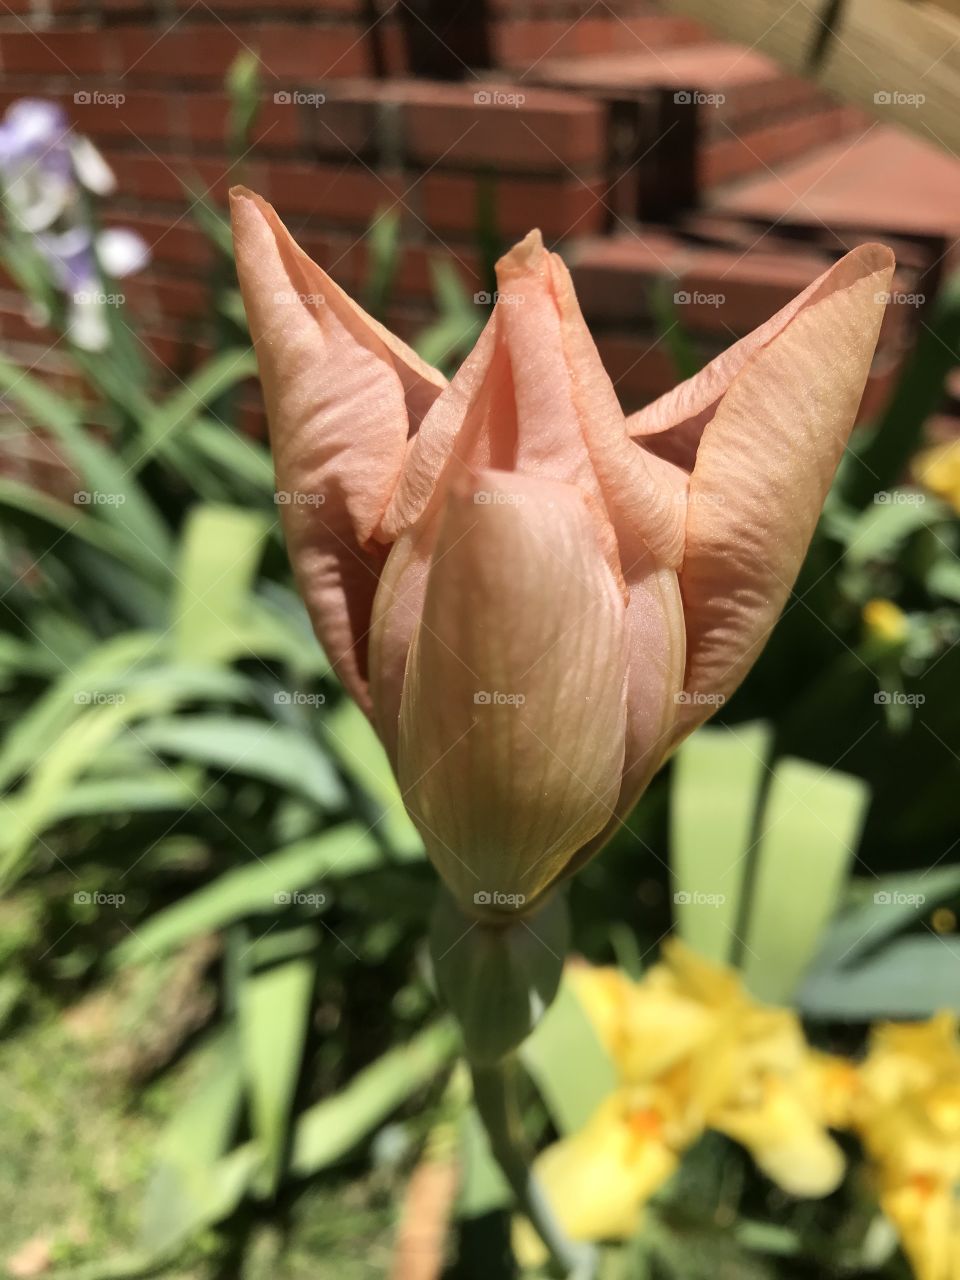 A peachy pink iris just beginning to fully open up it’s petals.